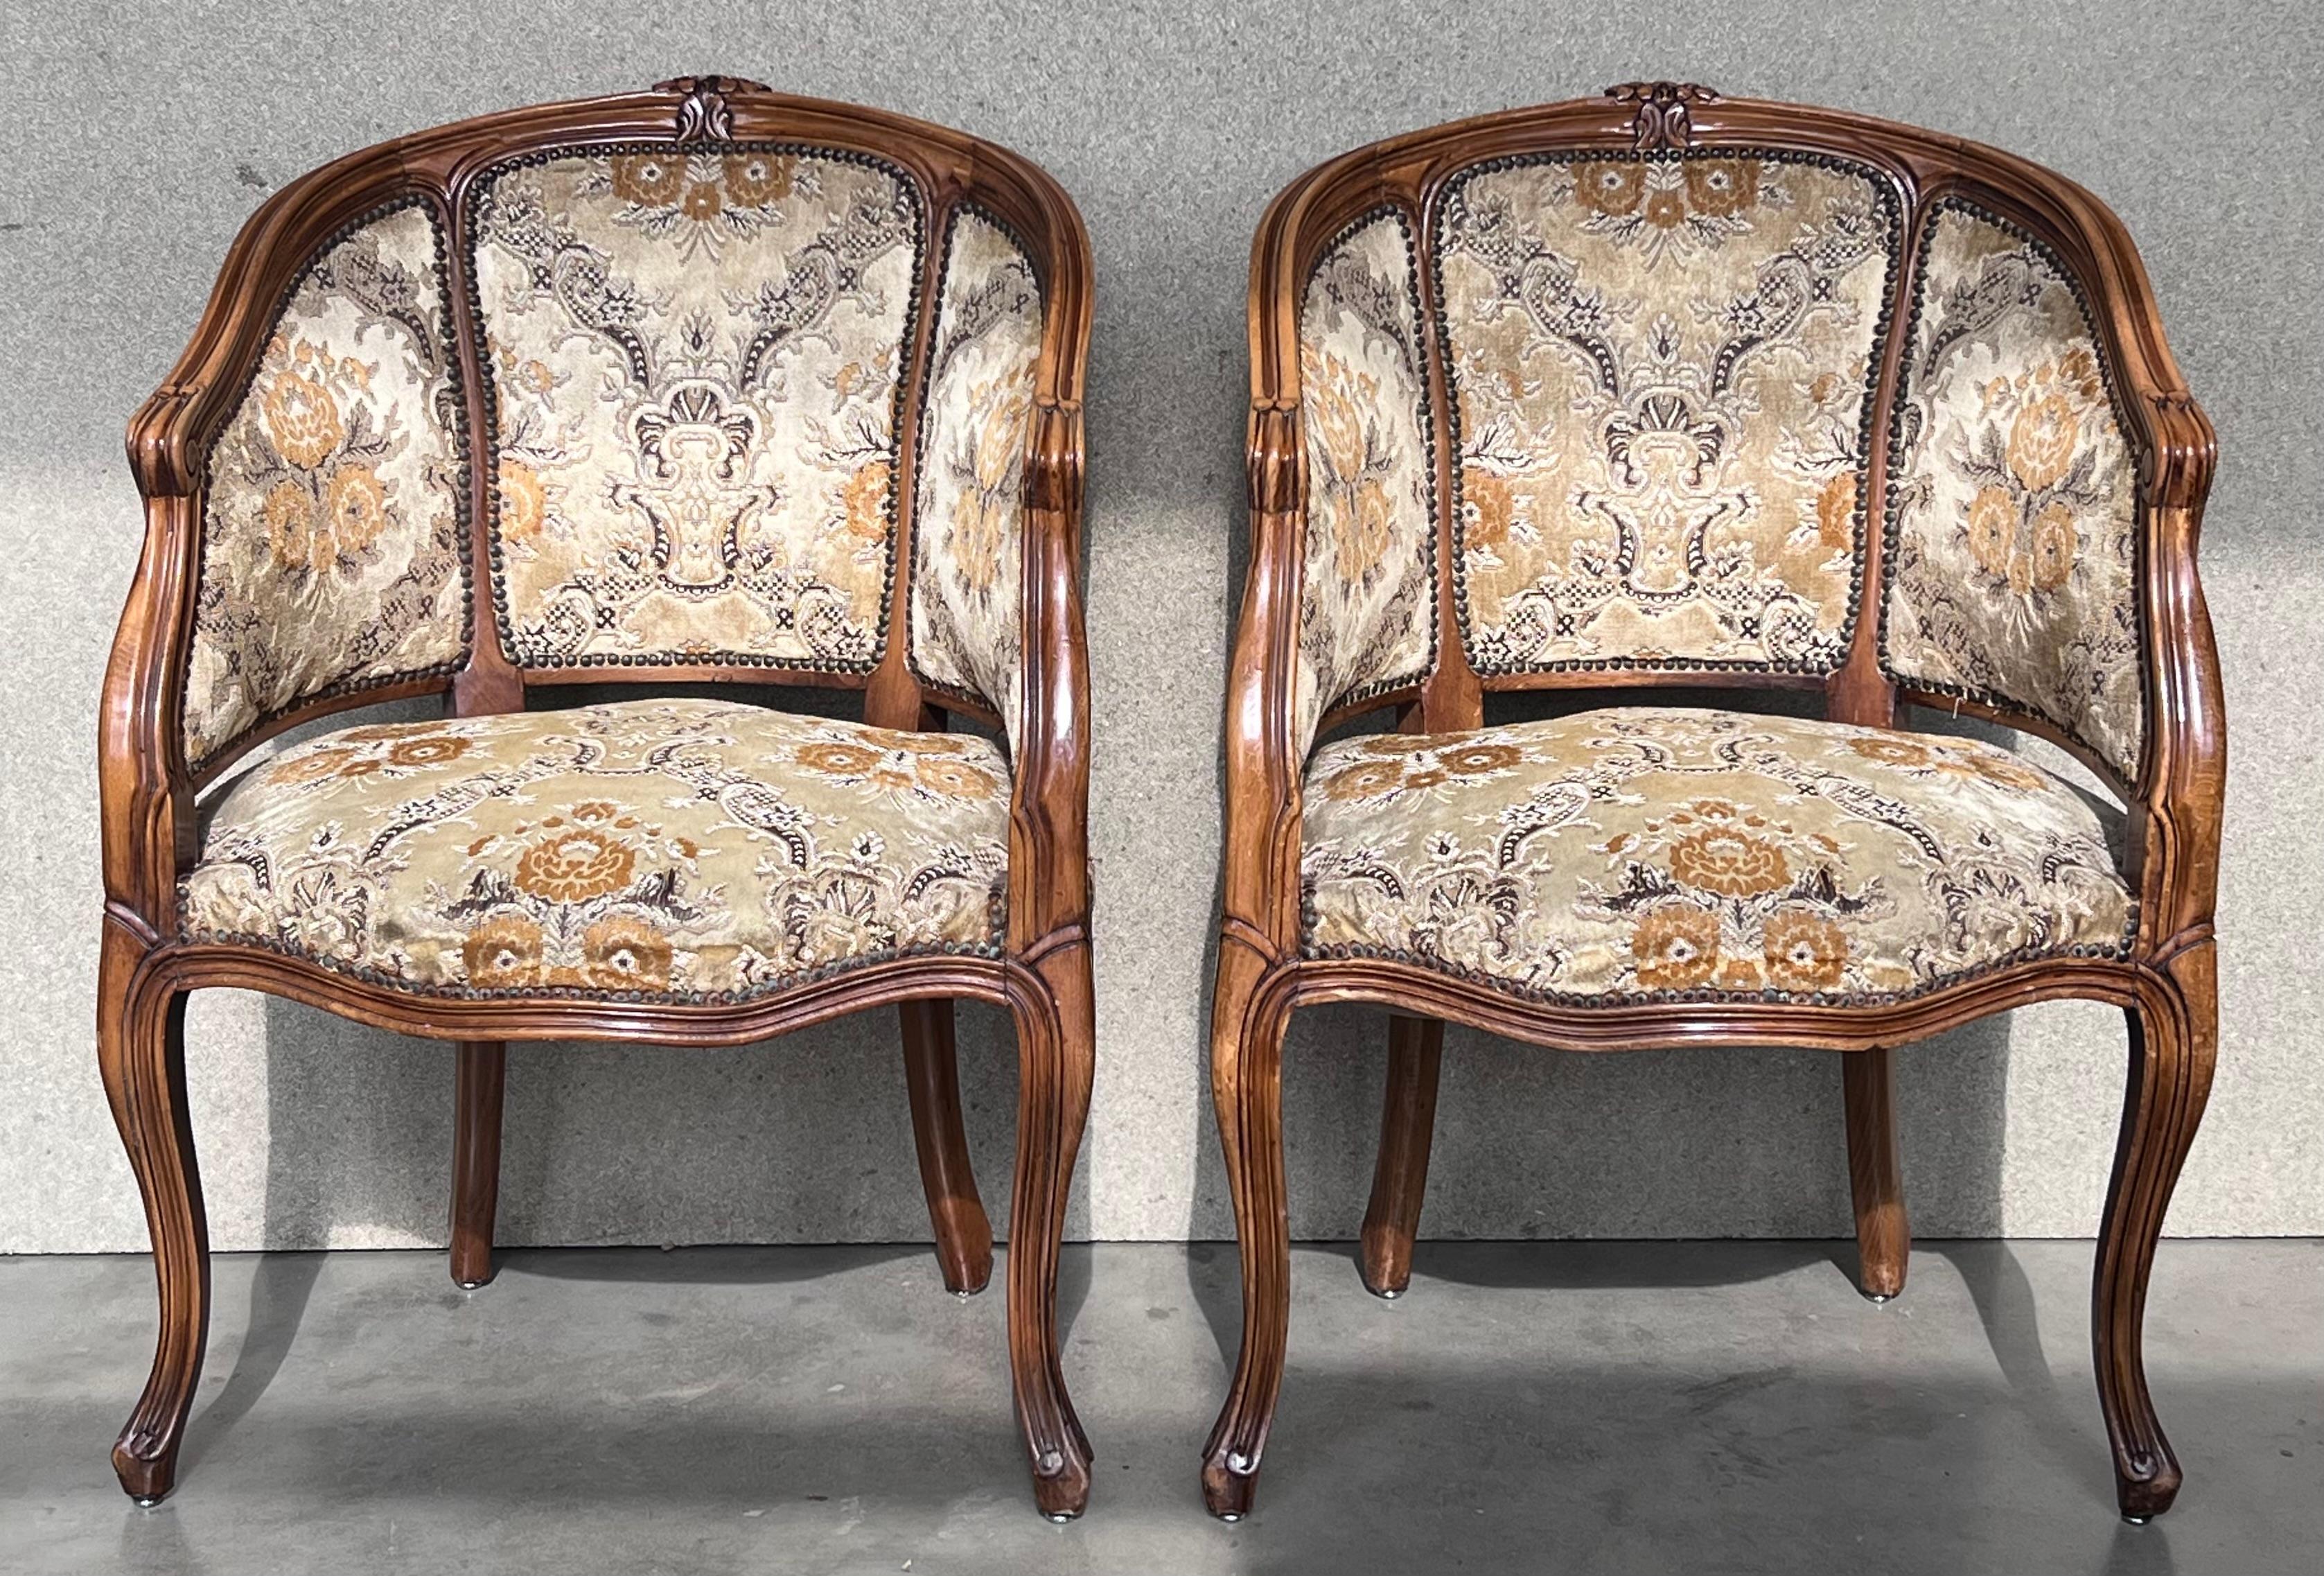 Whimsical pair of painted French Bergere armchairs made in the grand Louis XVI taste. The armchairs feature a barrel back form with a molded frame having neoclassical laurel swag decoration on the seat apron. The gracefully curved back ends with